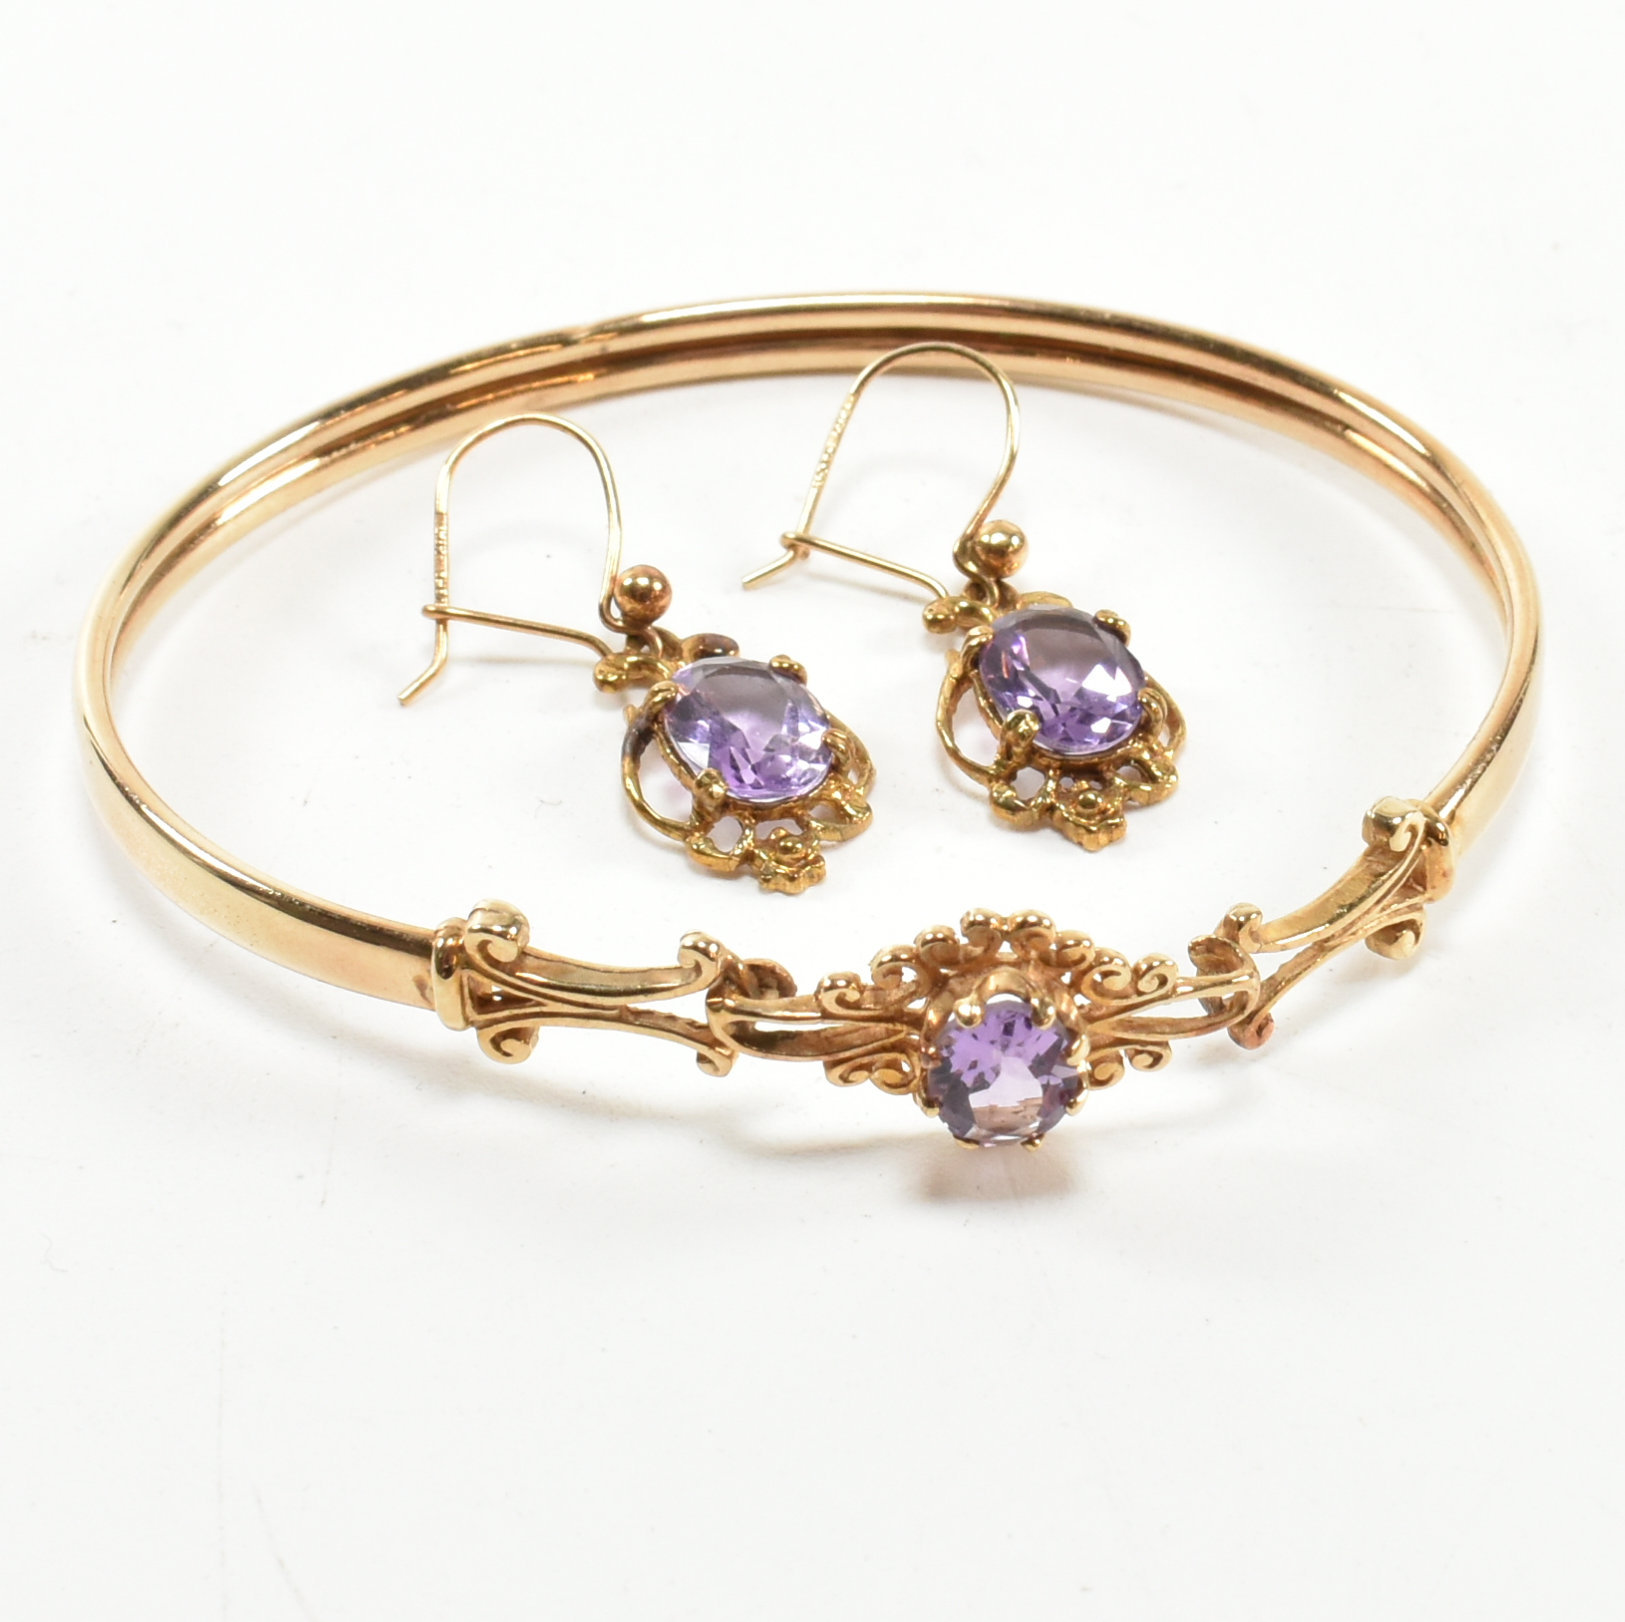 VICTORIAN STYLE HALLMARKED 9CT GOLD & AMETHYST BANGLE & EARRING SET - Image 2 of 14